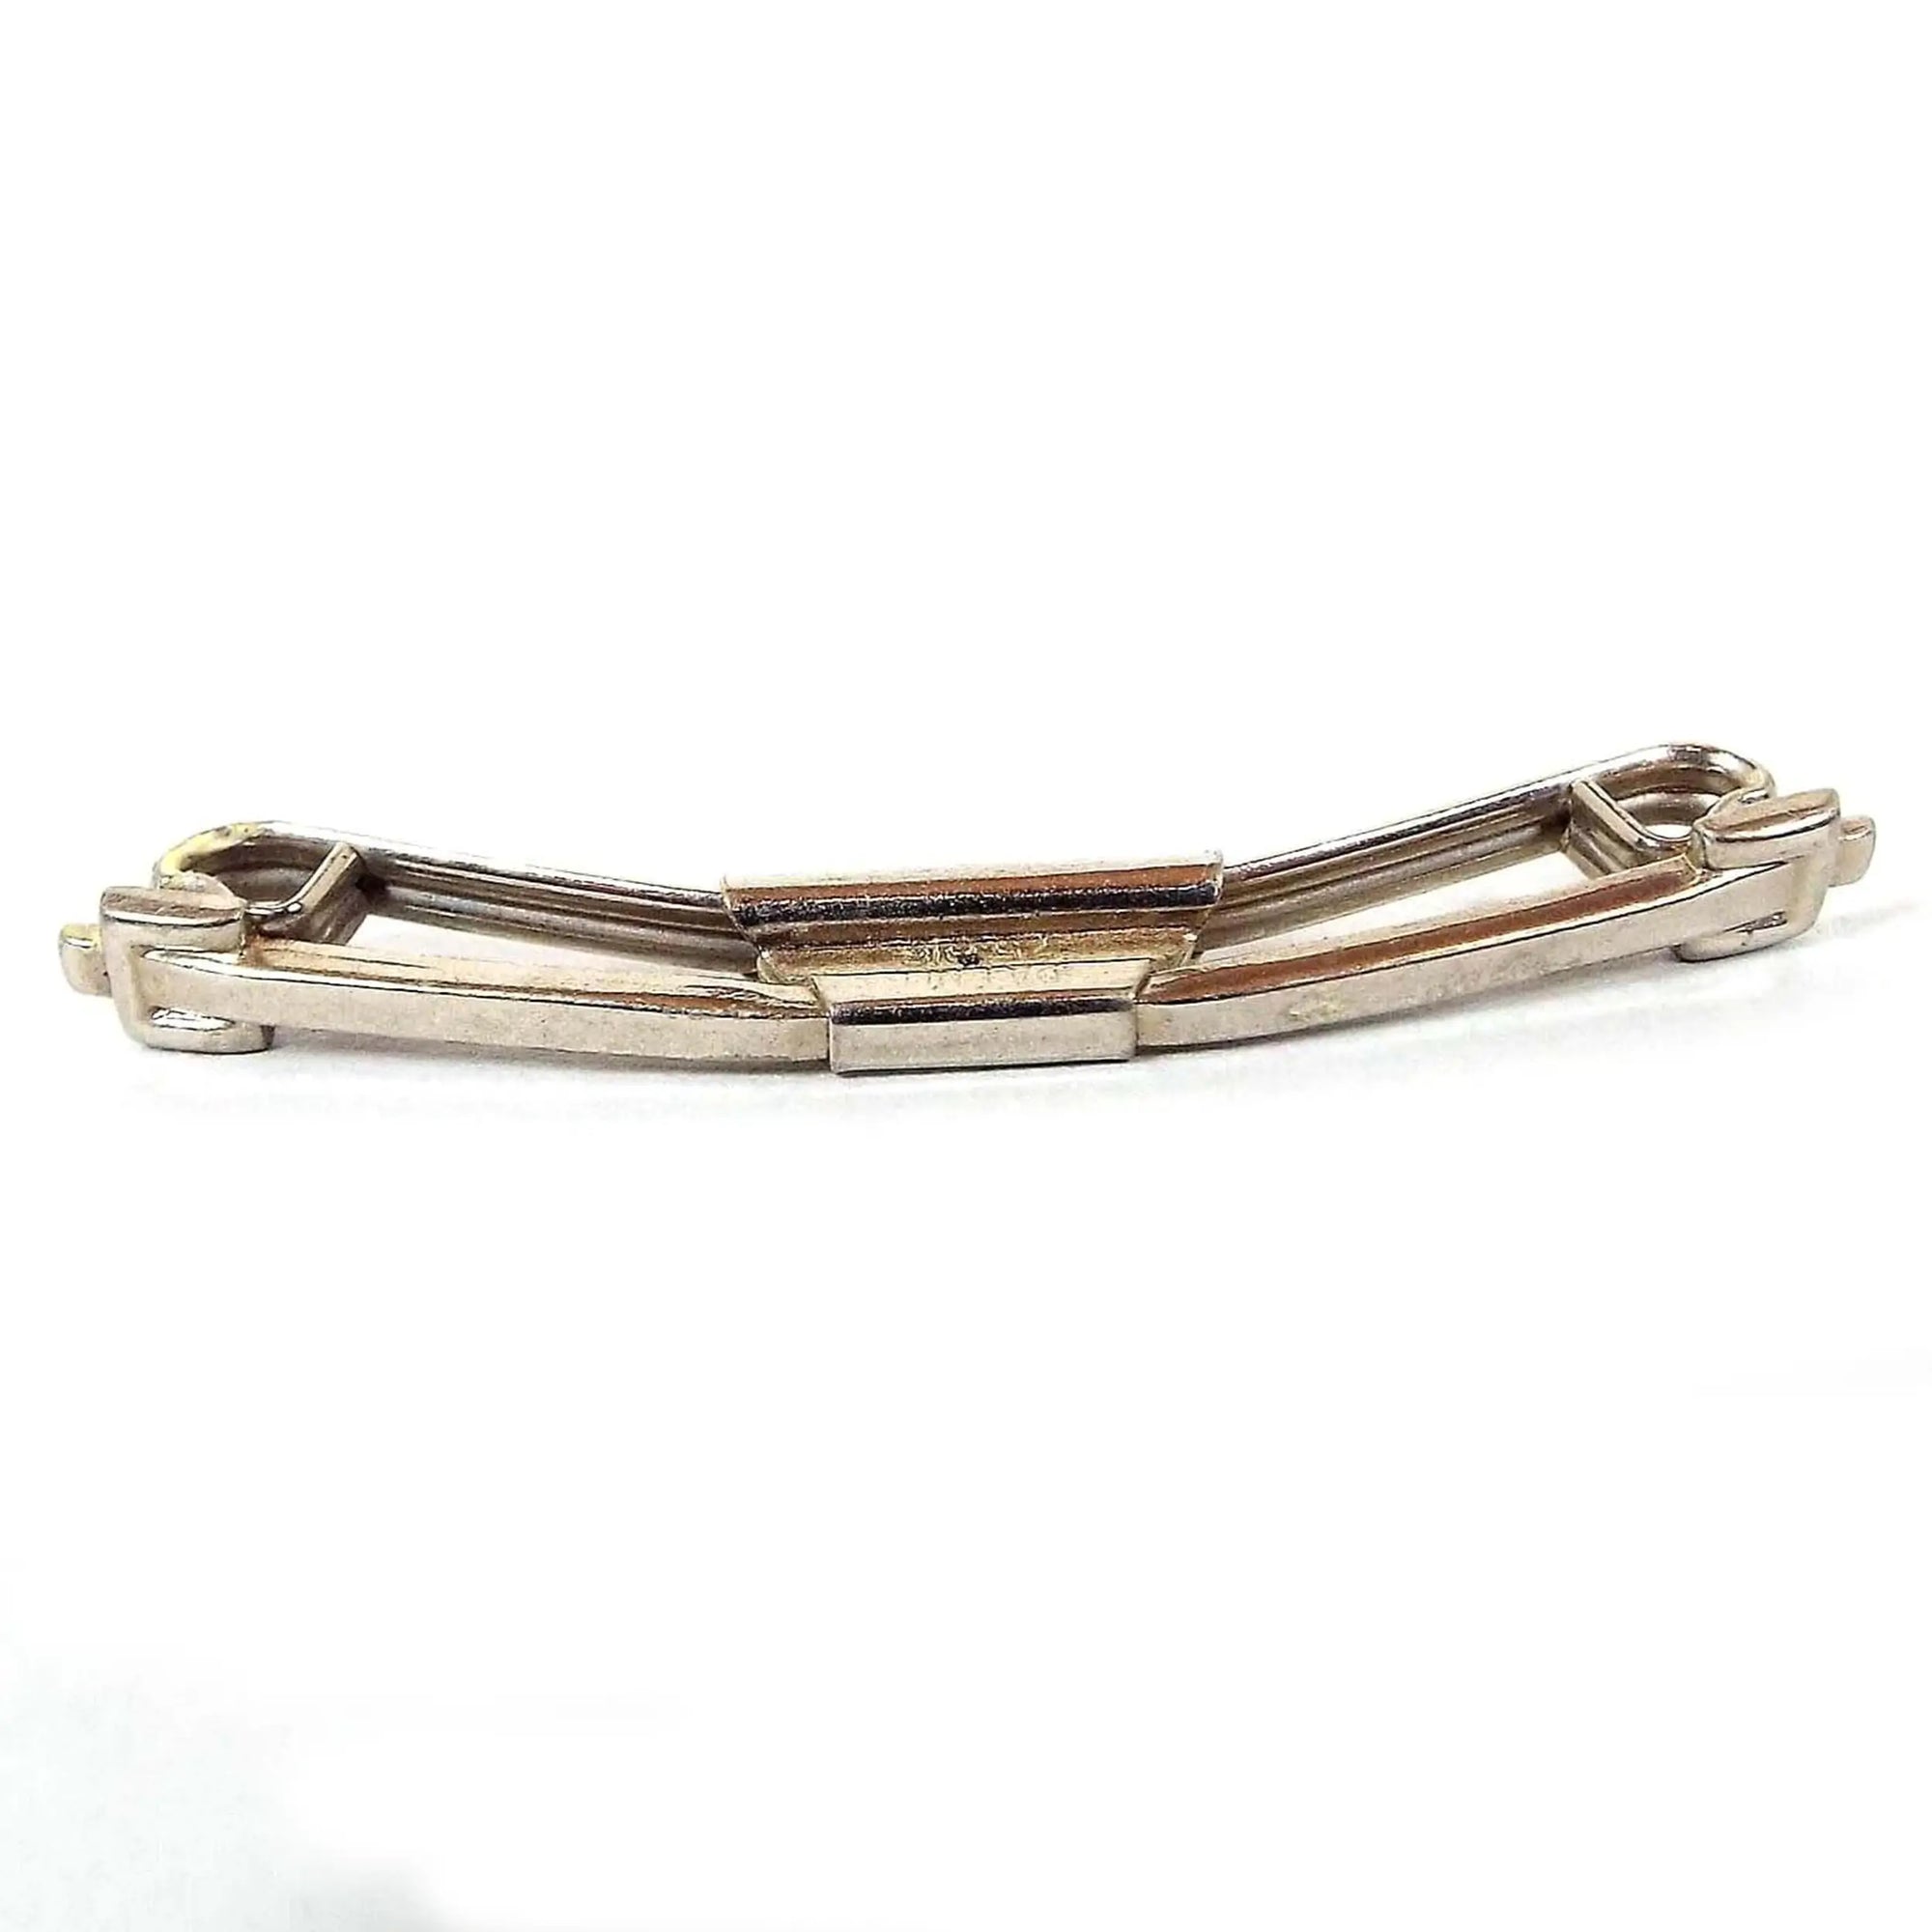 Front view of the 1920's Art Deco vintage Swank collar clip bar. The metal is silver tone in color. The front bar is curved and thin with a squared belt buckle style design on the metal at the ends. The back is curled inwards at the ends. There is a rectangular area in the middle holding the bars together. Part of the stamped patent number can be seen on the side of the middle area.